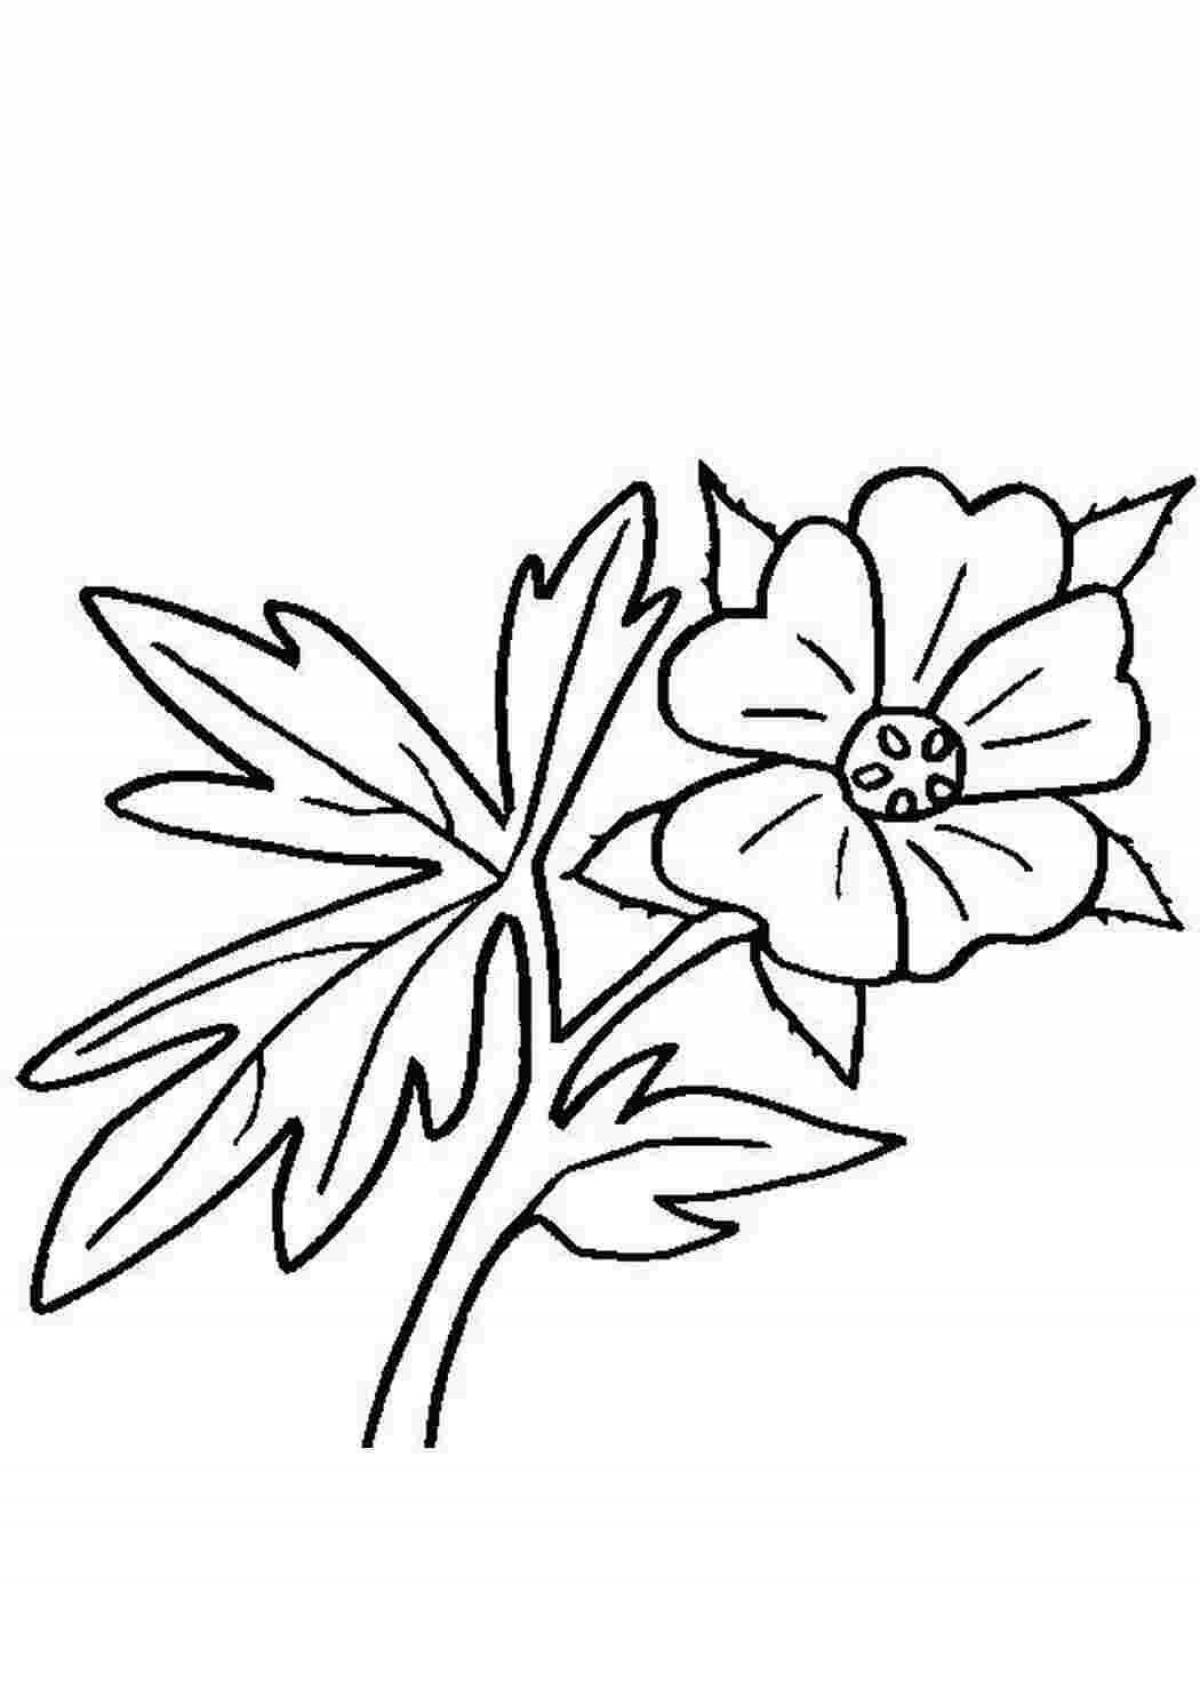 Coloring page exquisite azure flower